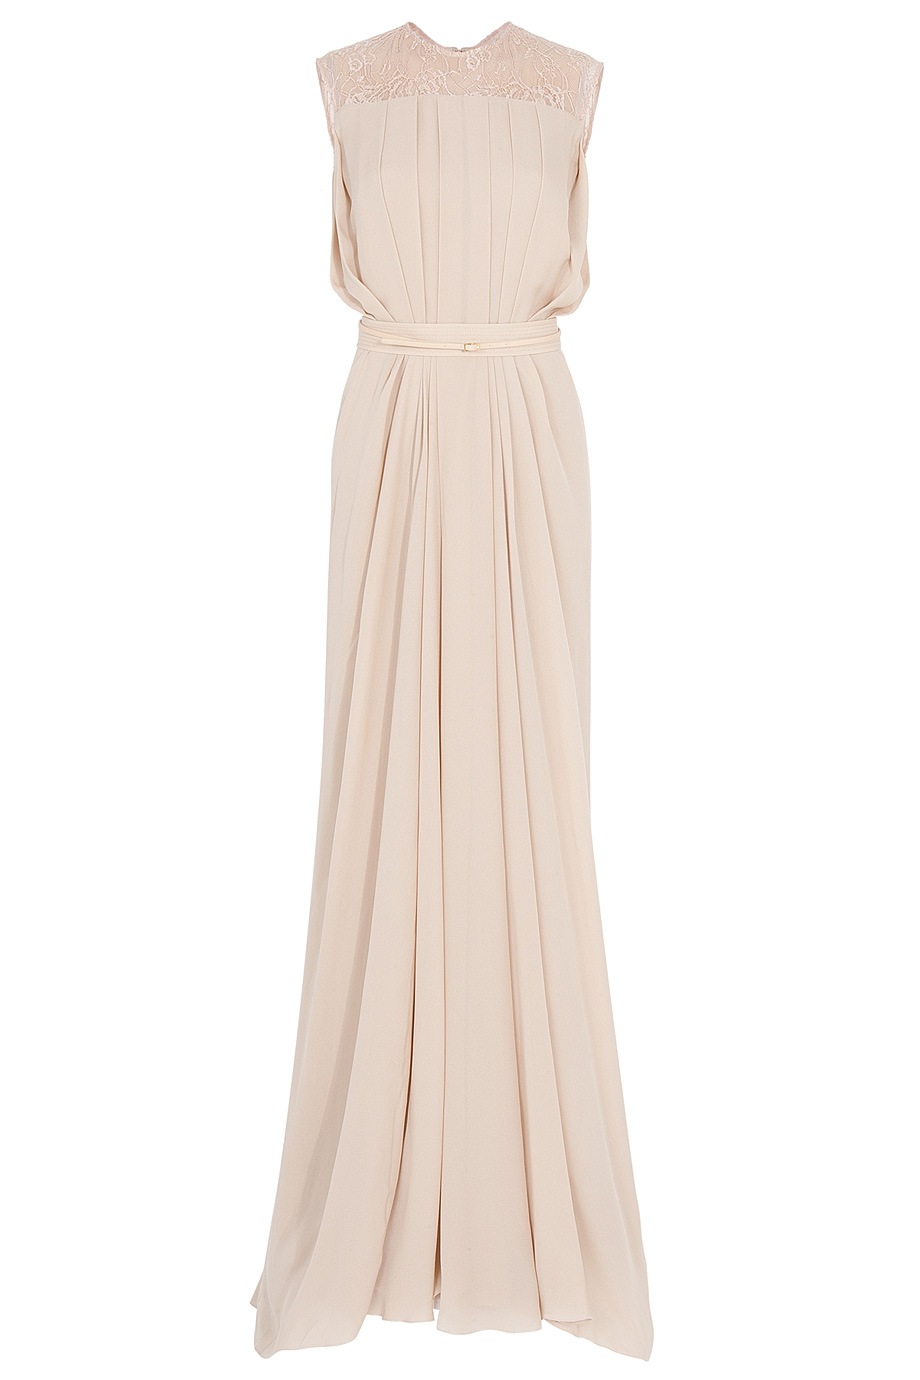 Lyst - Elie Saab Lace Back Georgette Gown in Natural